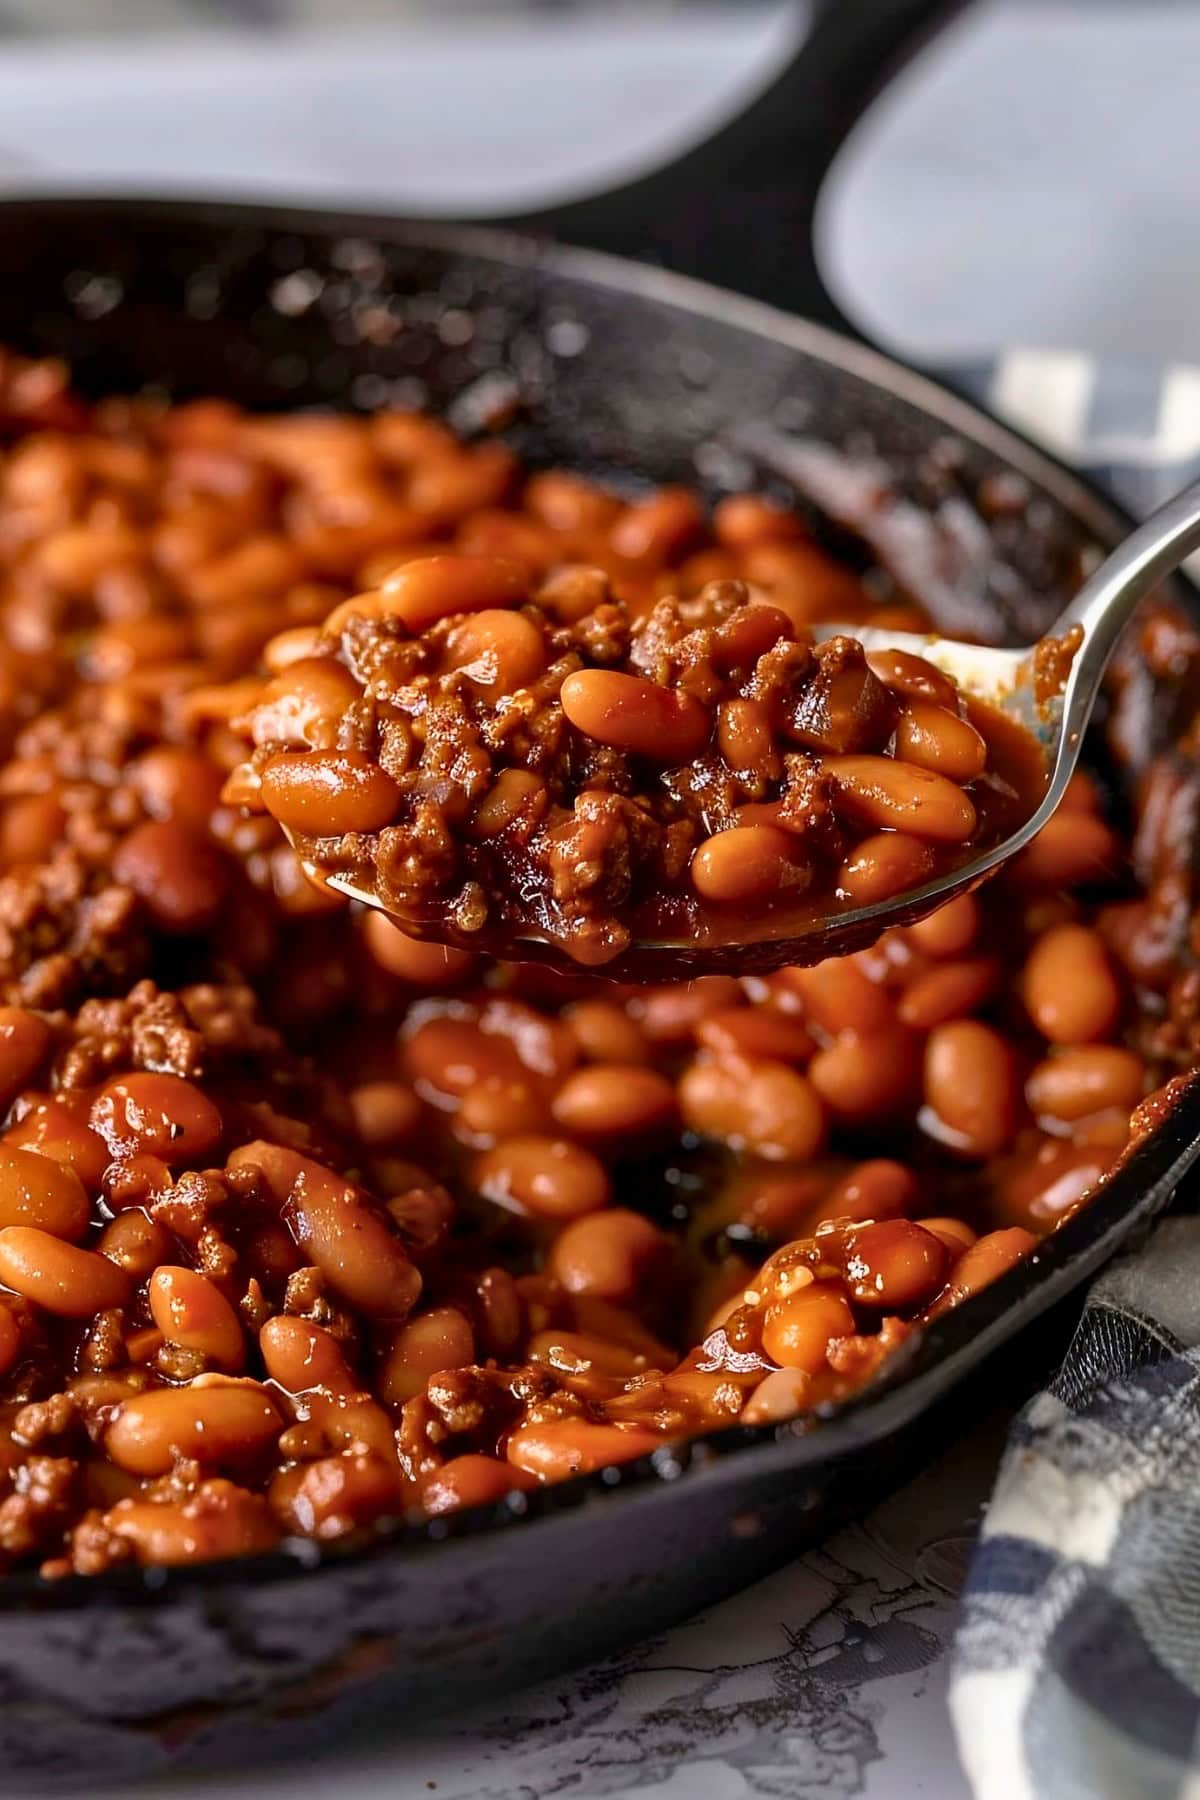 Close Up of a Spoonful of BBQ Baked Beans- with Ground Beef, Beans, and Sauce- Held Over a Cast Iron Skillet with More BBQ Baked Beans